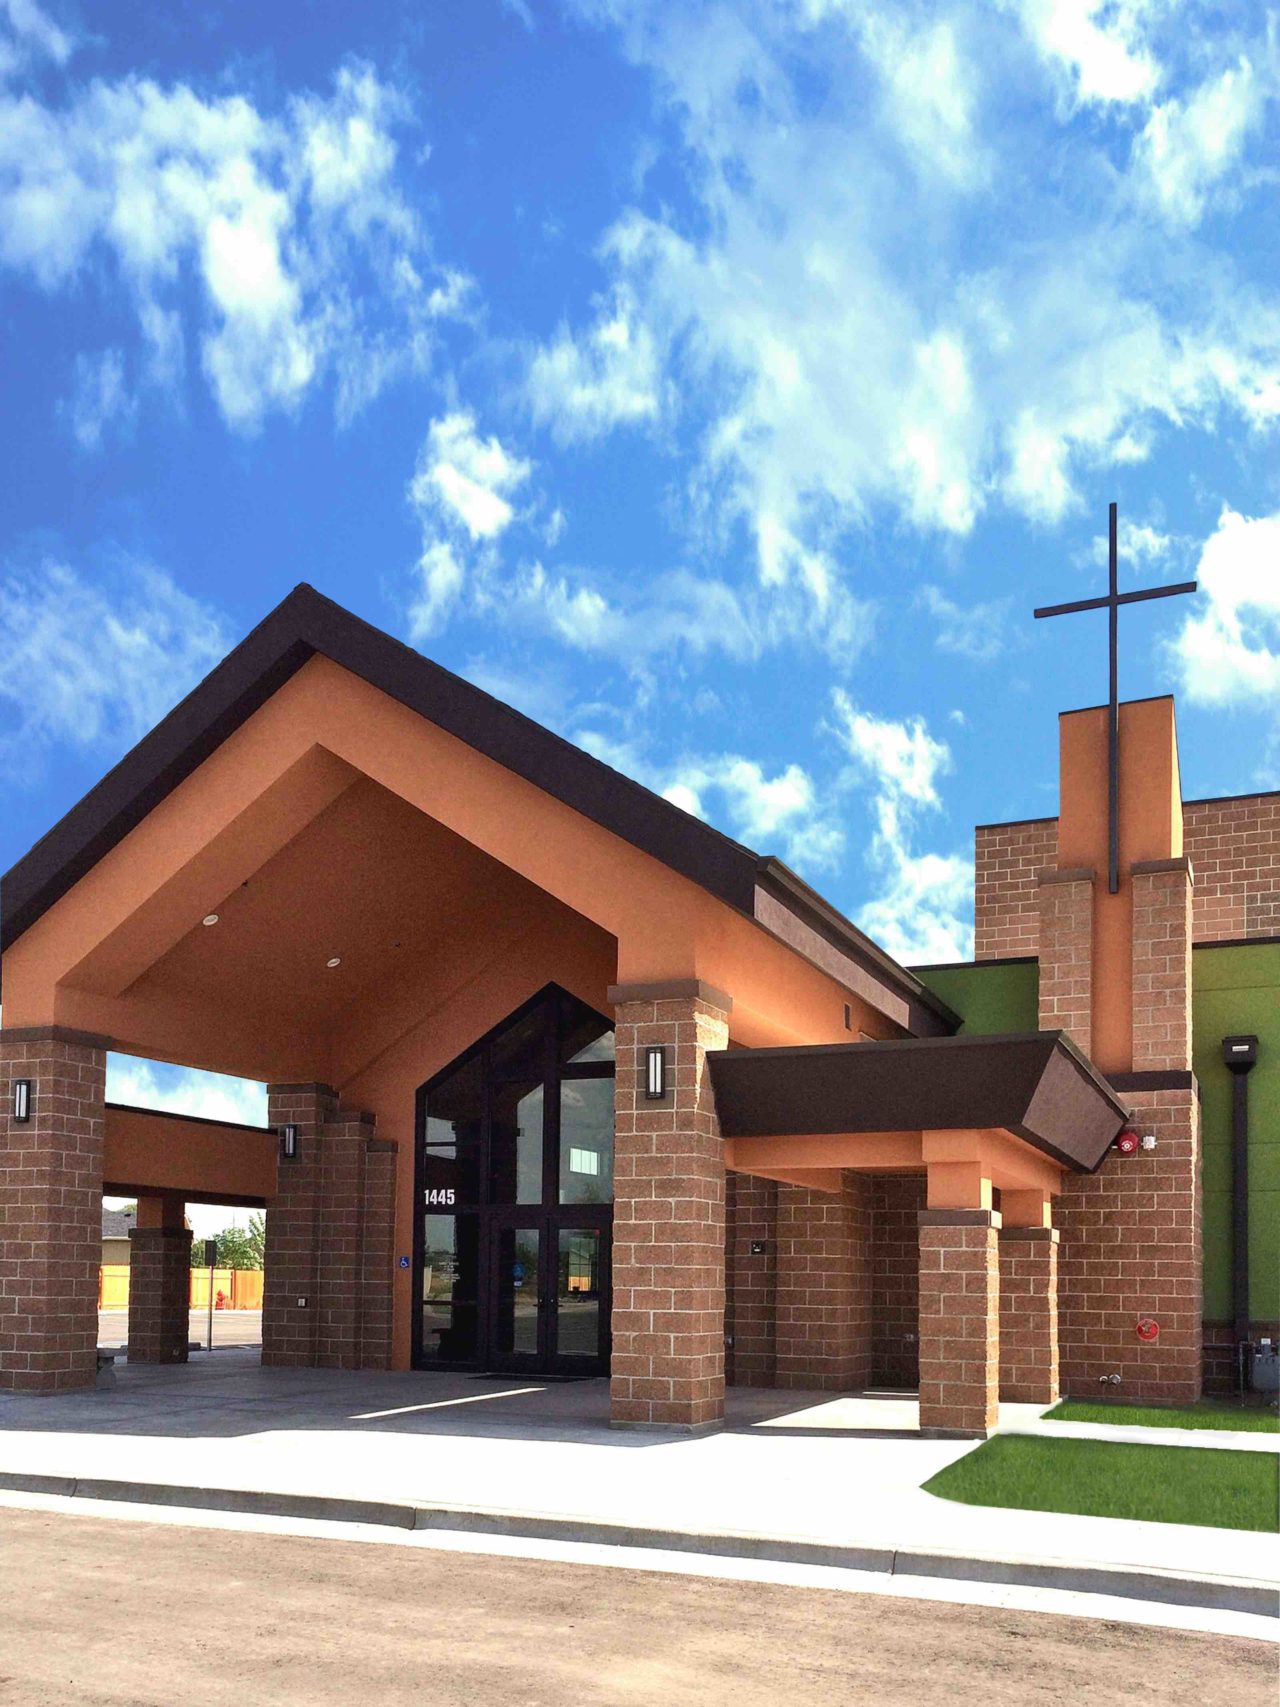 Idaho worship and community center. Church architecture church design. Mountain West Architects. Brick church exterior. Storefront church entrance. Gabled roof overhang church entrance.